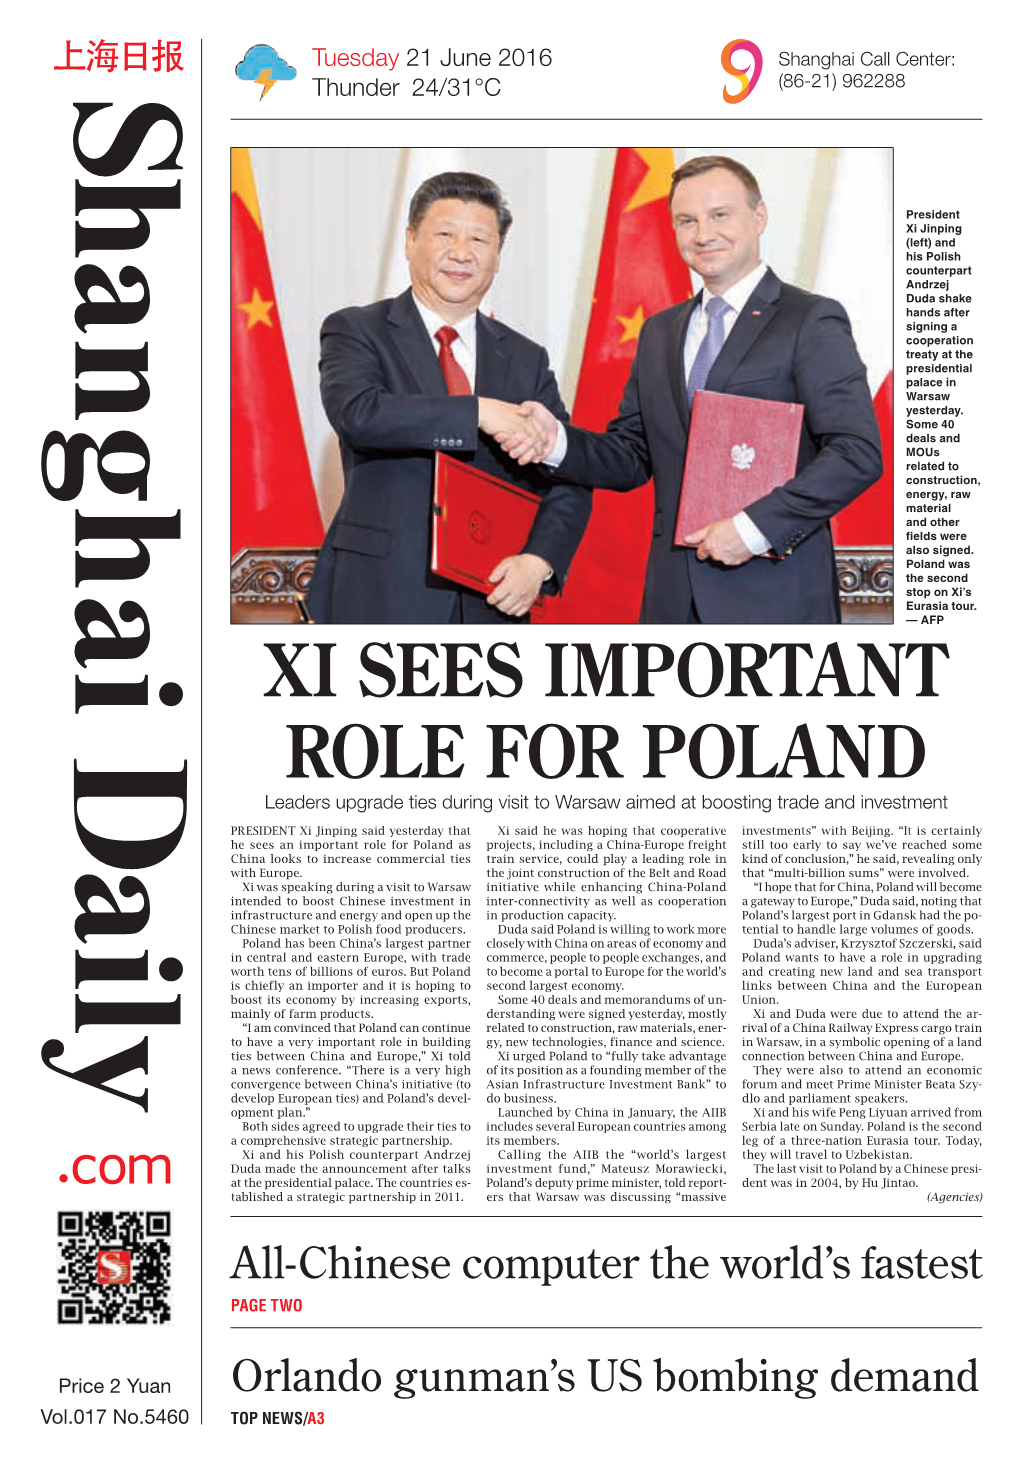 Xi Sees Important Role for Poland Leaders Upgrade Ties During Visit to Warsaw Aimed at Boosting Trade and Investment